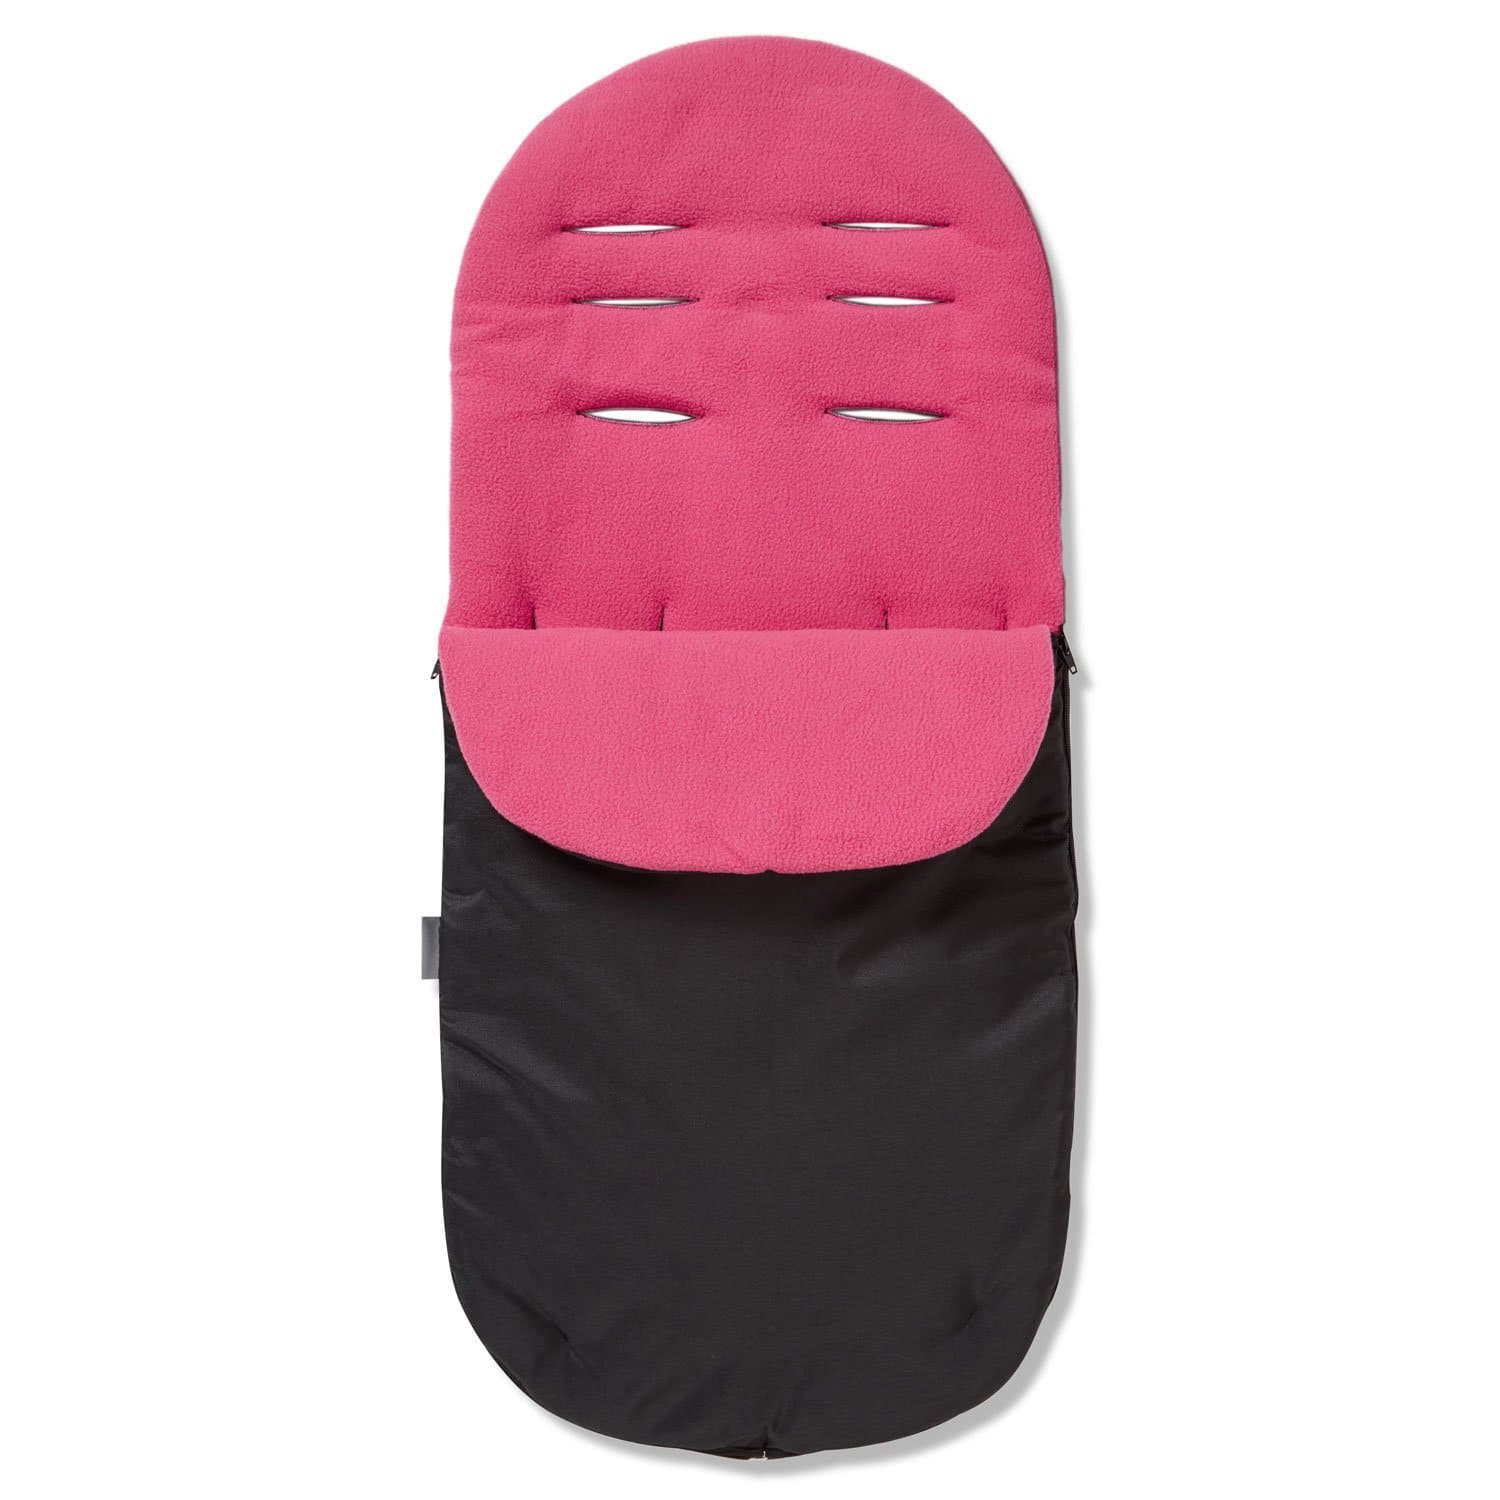 Footmuff / Cosy Toes Compatible with Ickle Bubba - Dark Pink / Fits All Models | For Your Little One